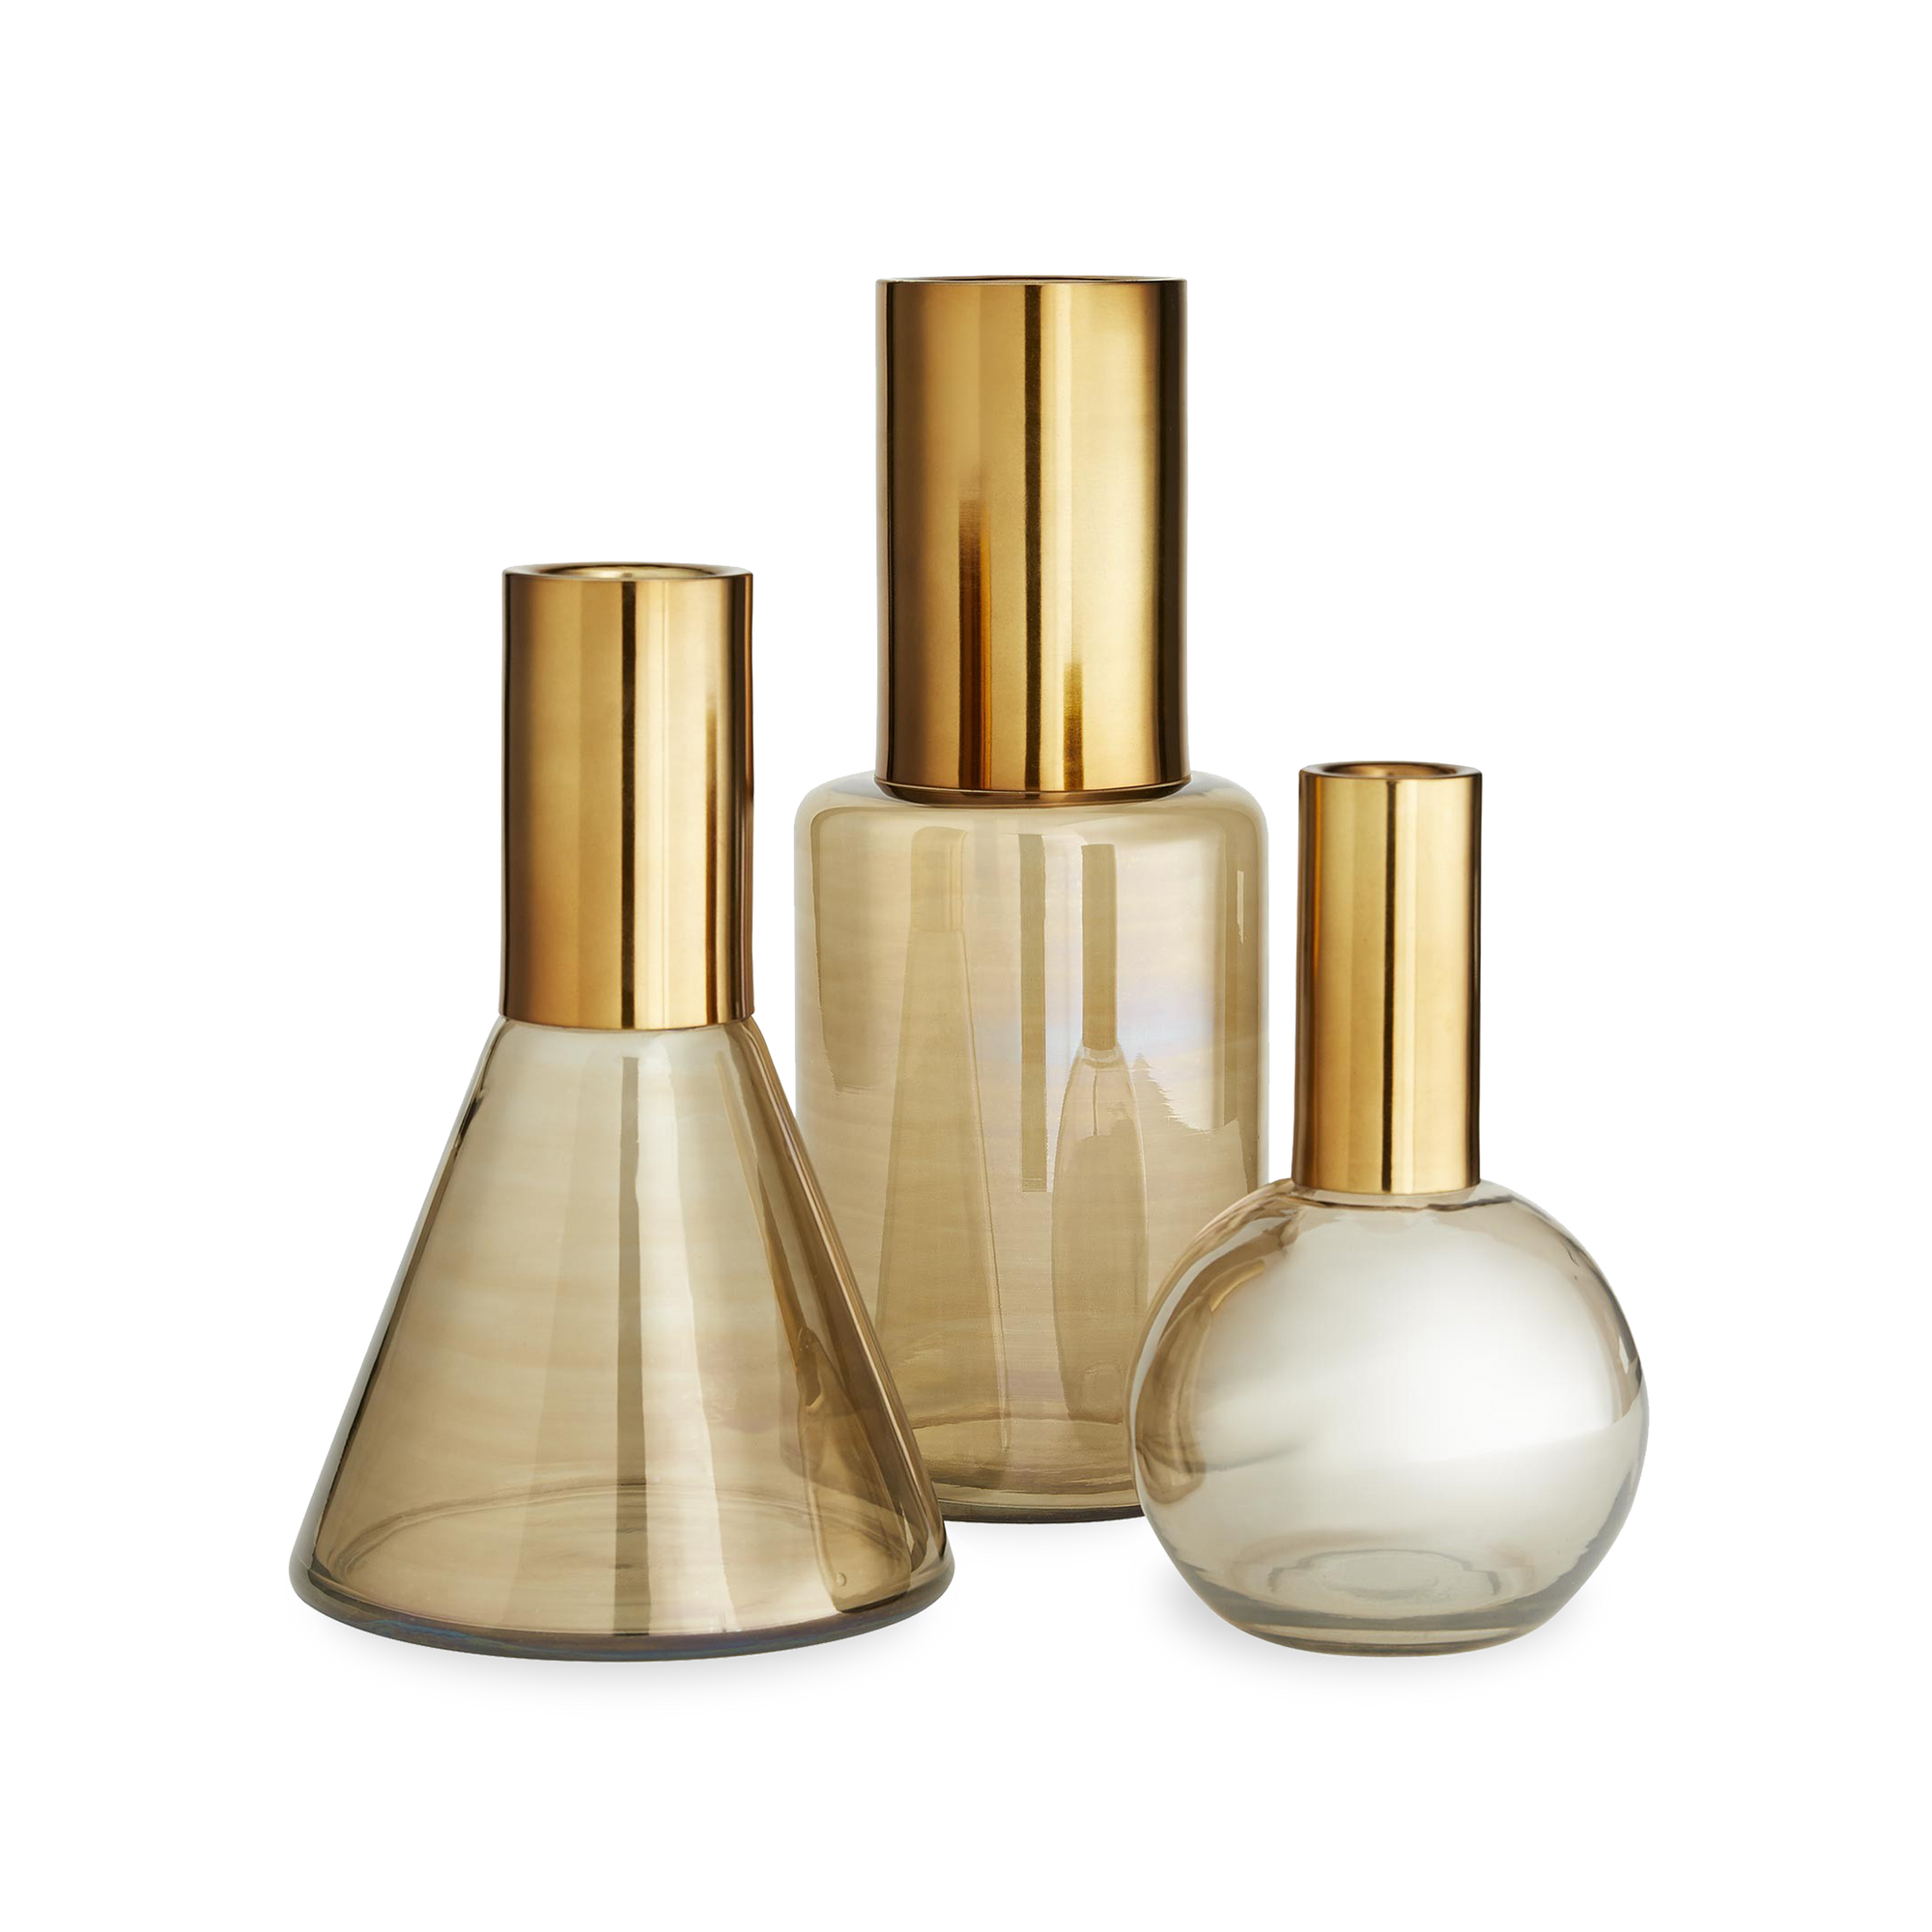 Modern in form, smoke luster glass with antique brass necks unite to create each individually shaped piece.